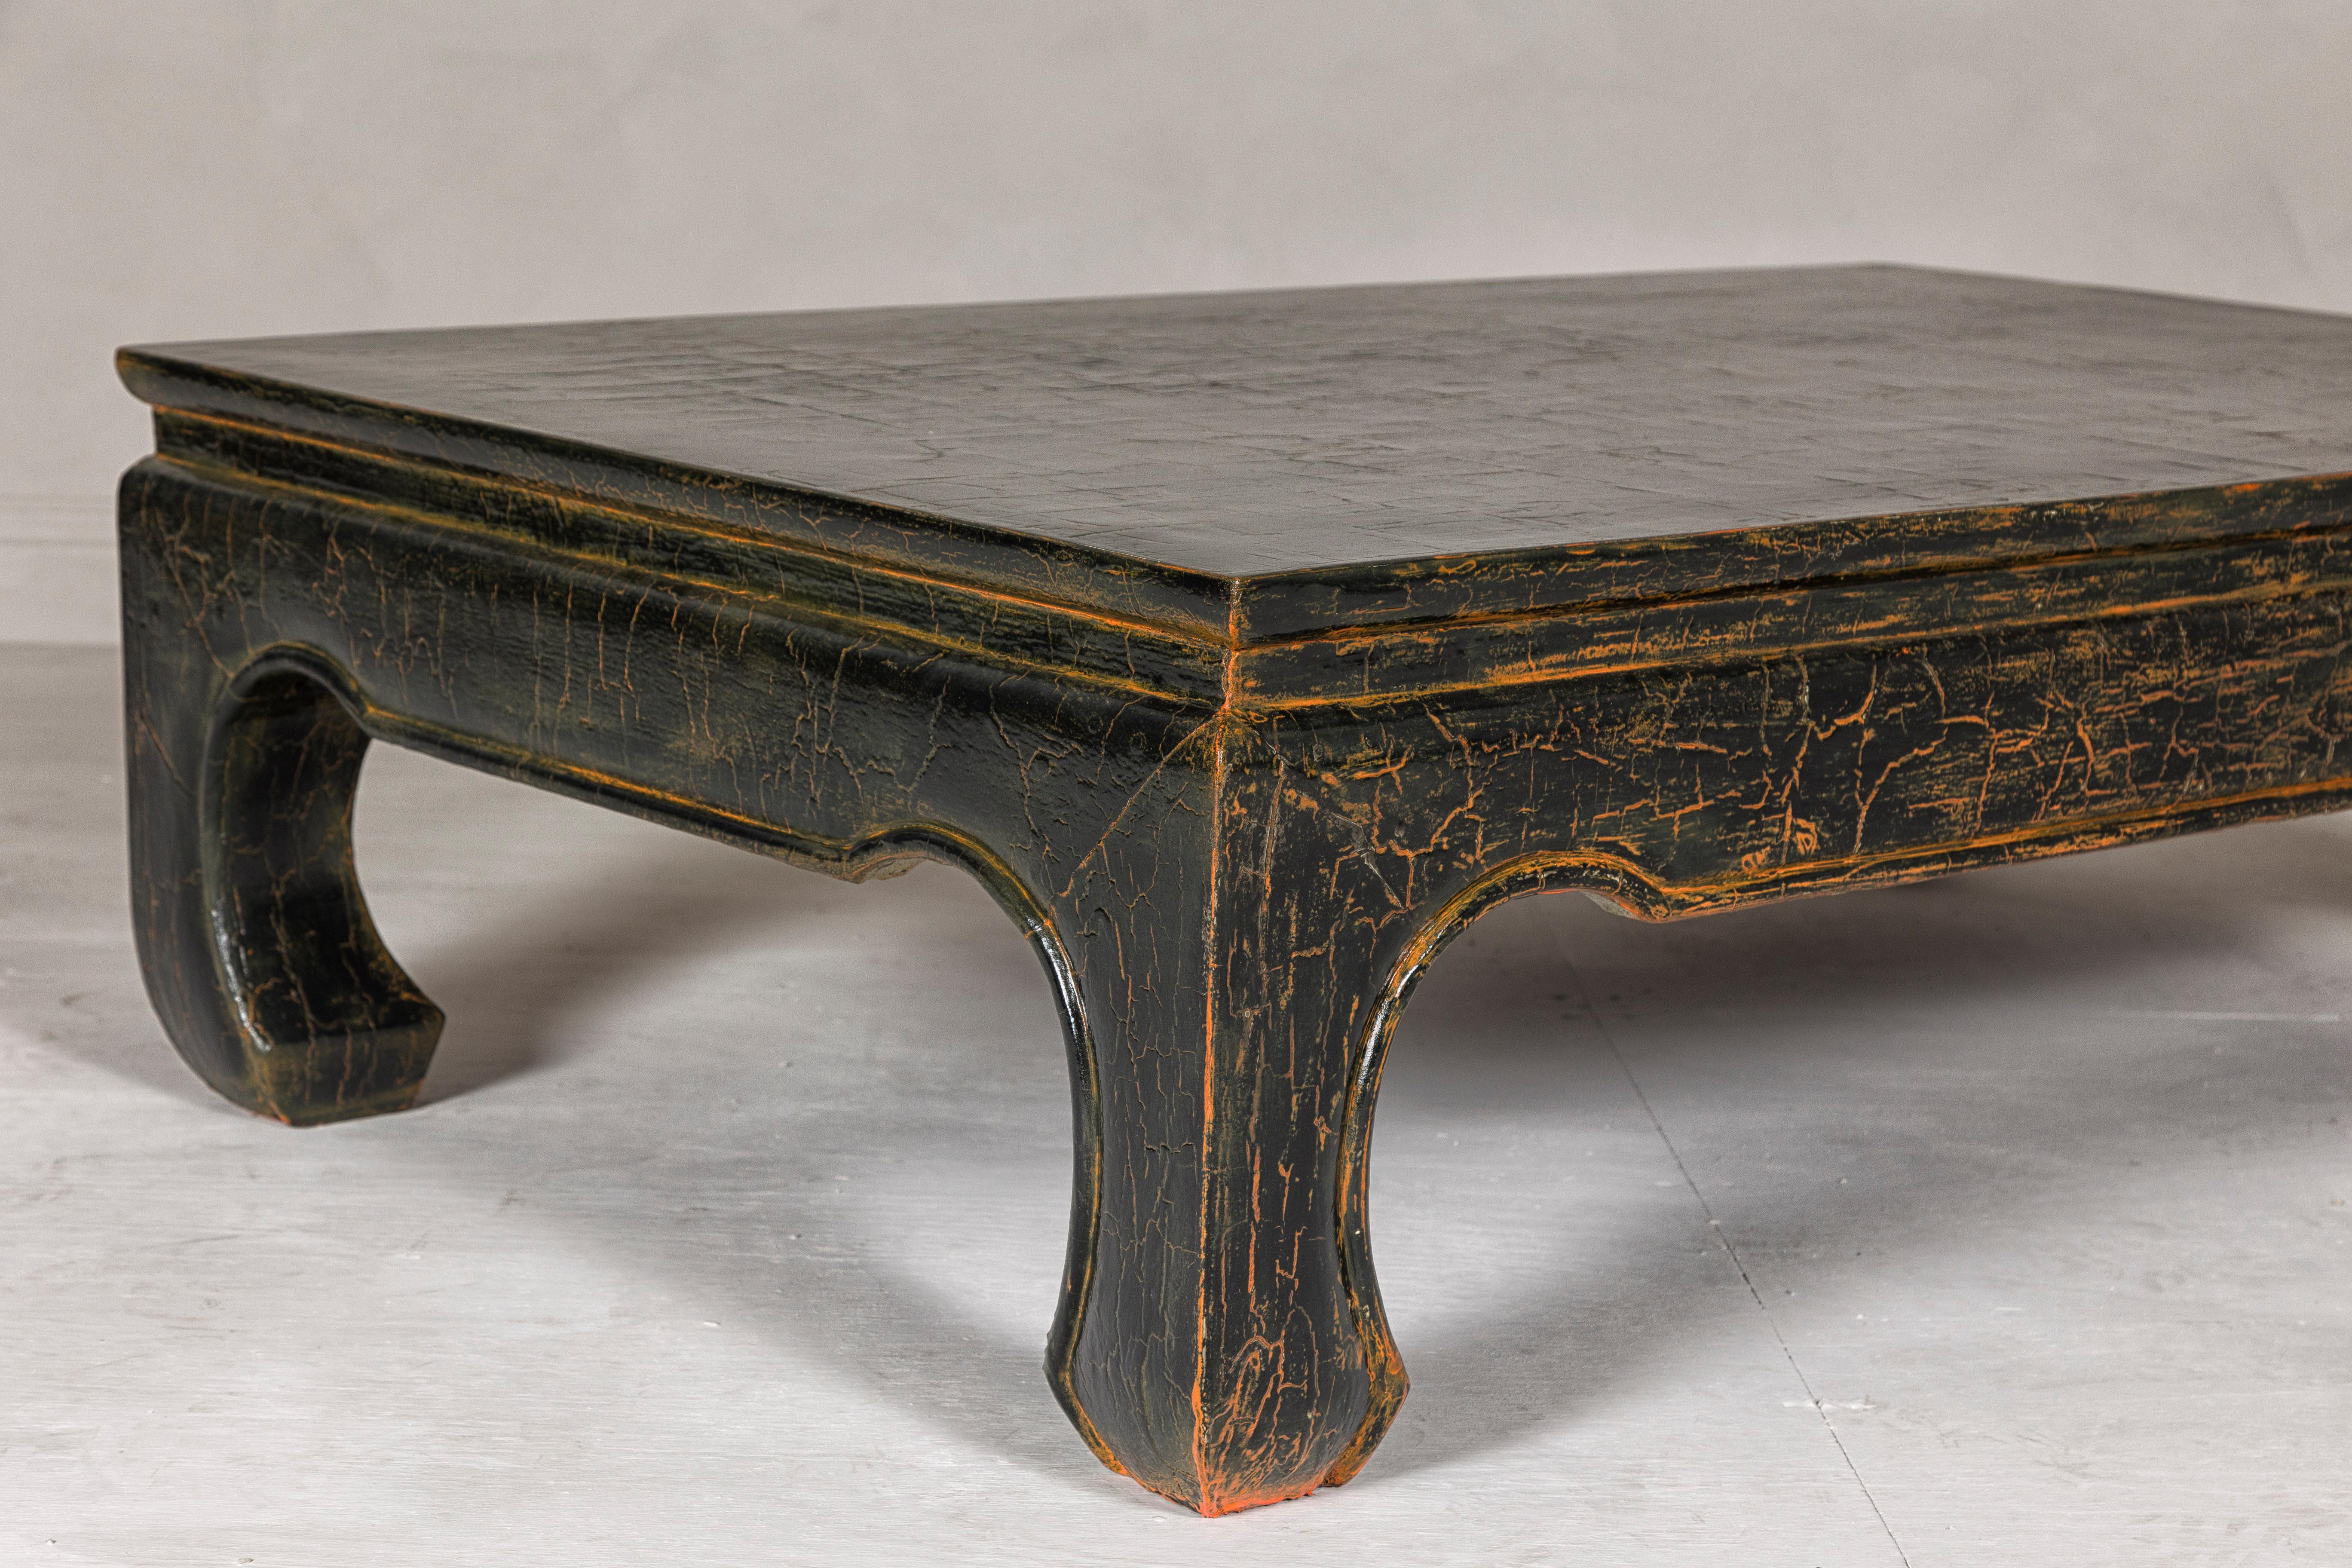 Vintage Chow Legs Distressed Black Coffee Table with Crackle Orange Finish For Sale 5